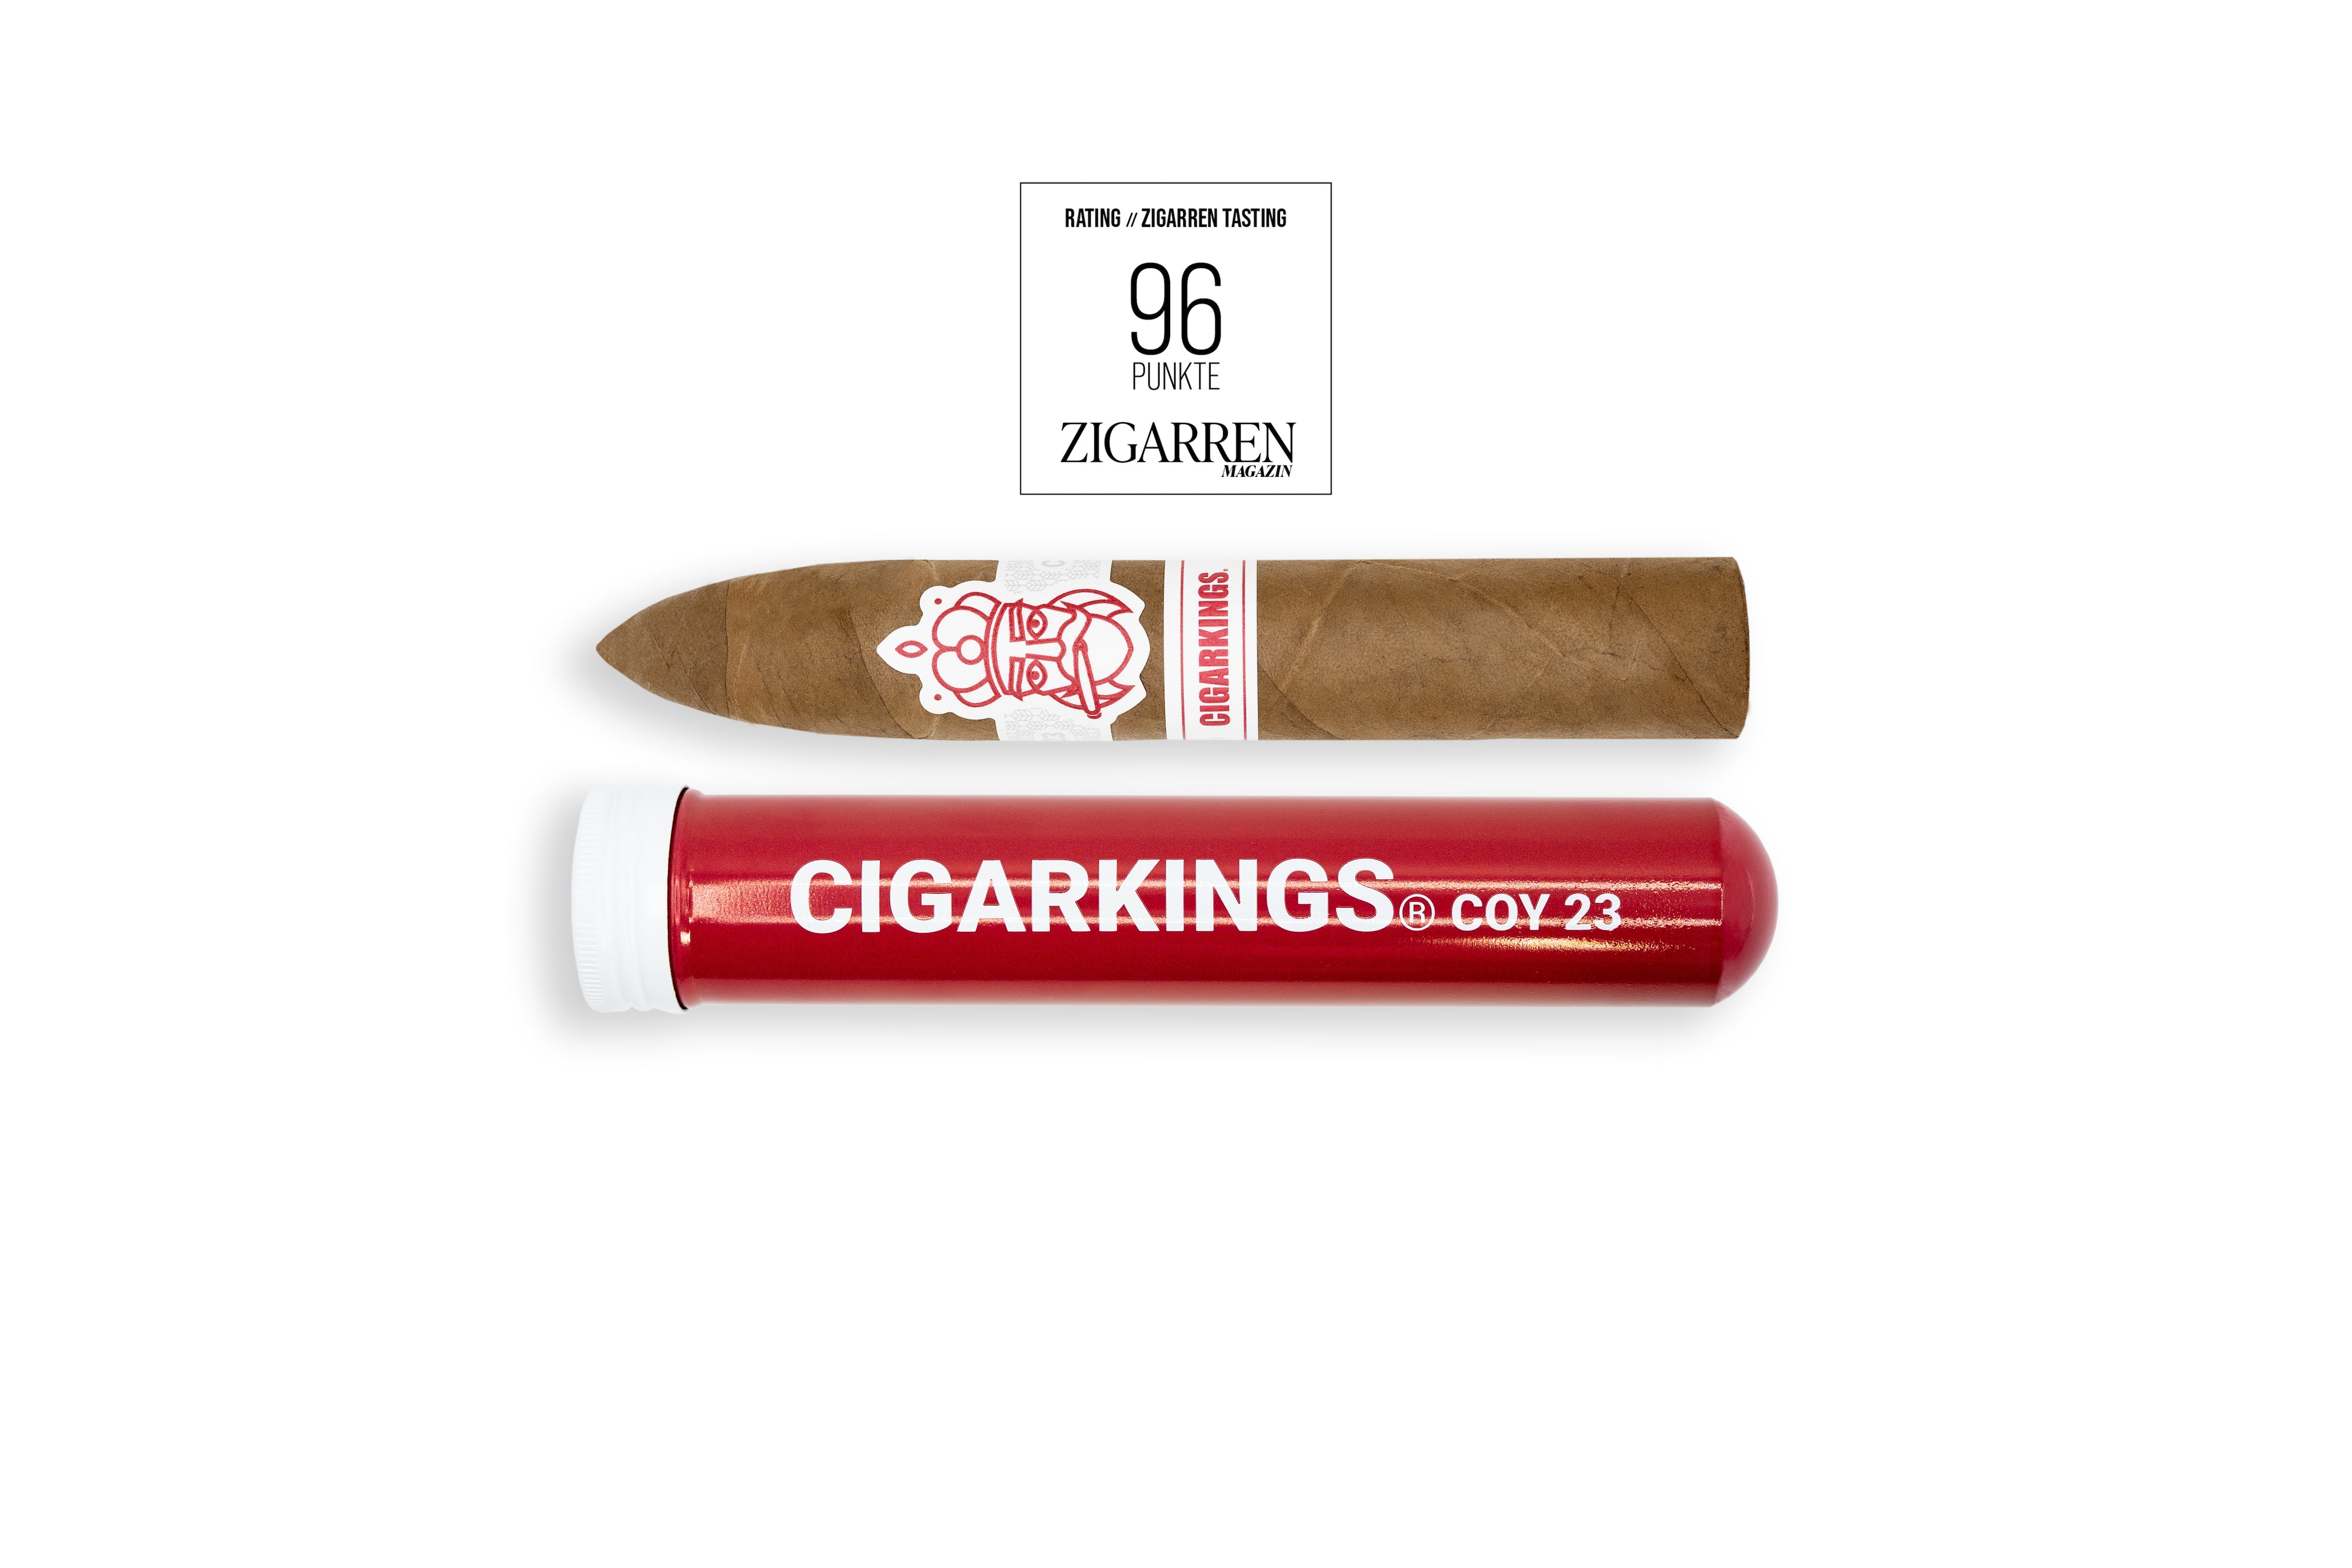 CigarKings COY 23 Belicoso Connecticut Tubos 96 Points Rating 